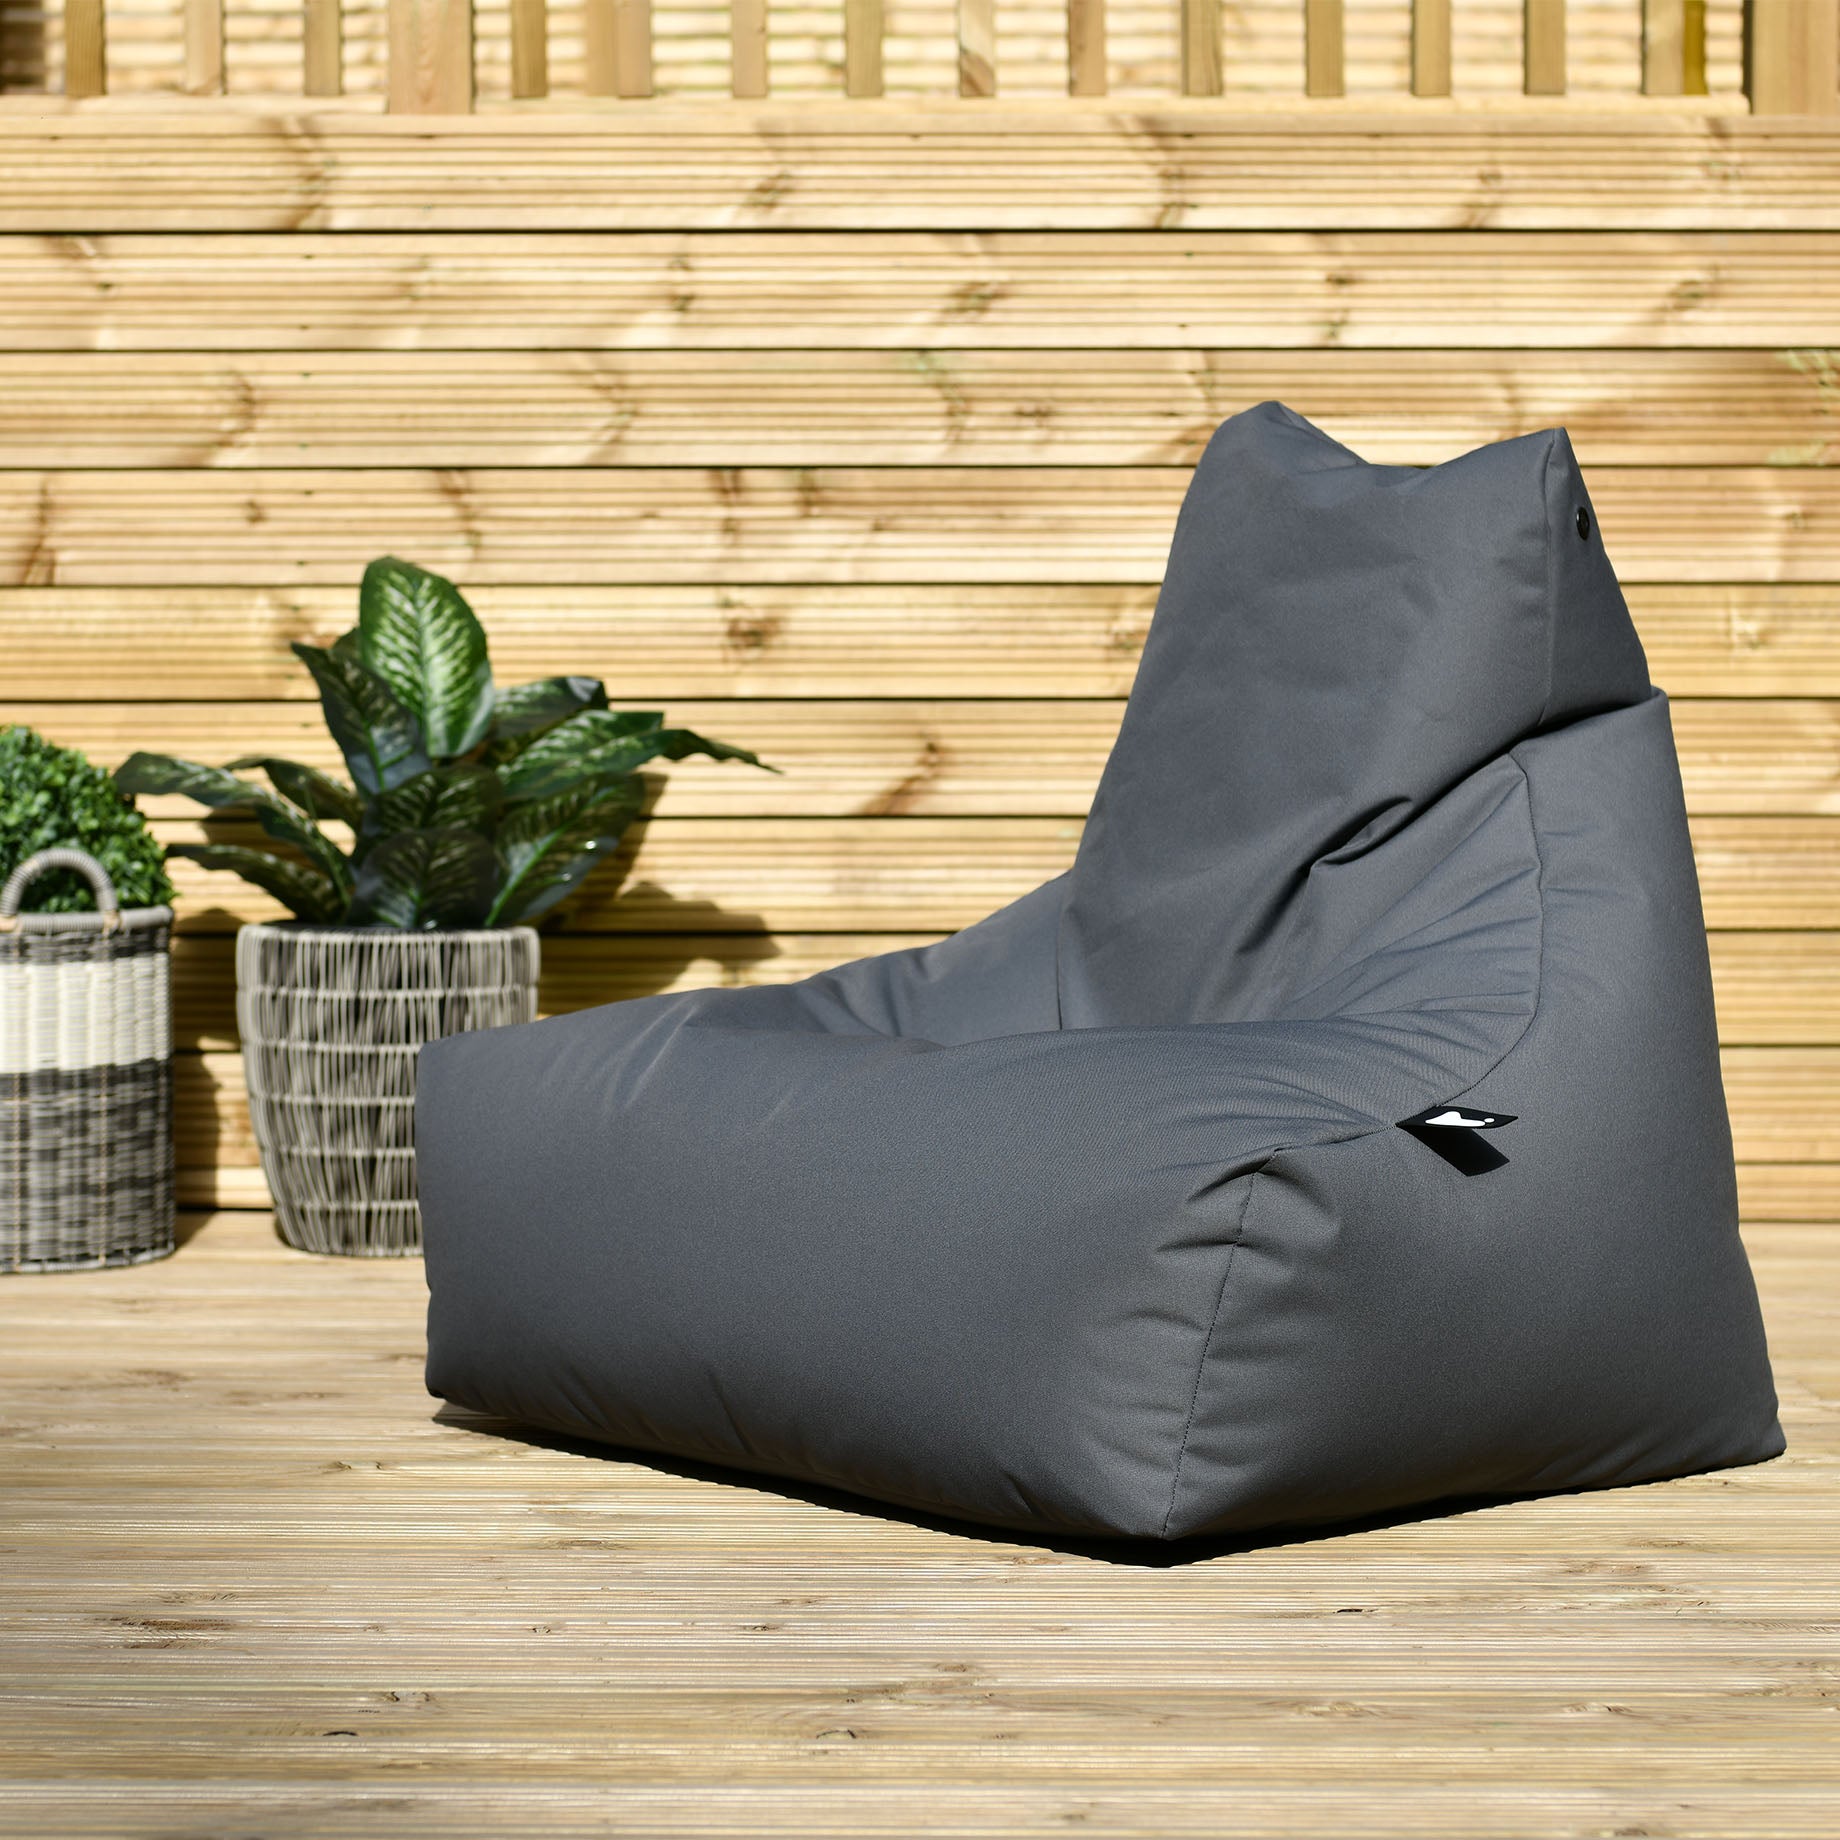 Extreme Lounging B-Bag Mighty Outdoor Beanbag